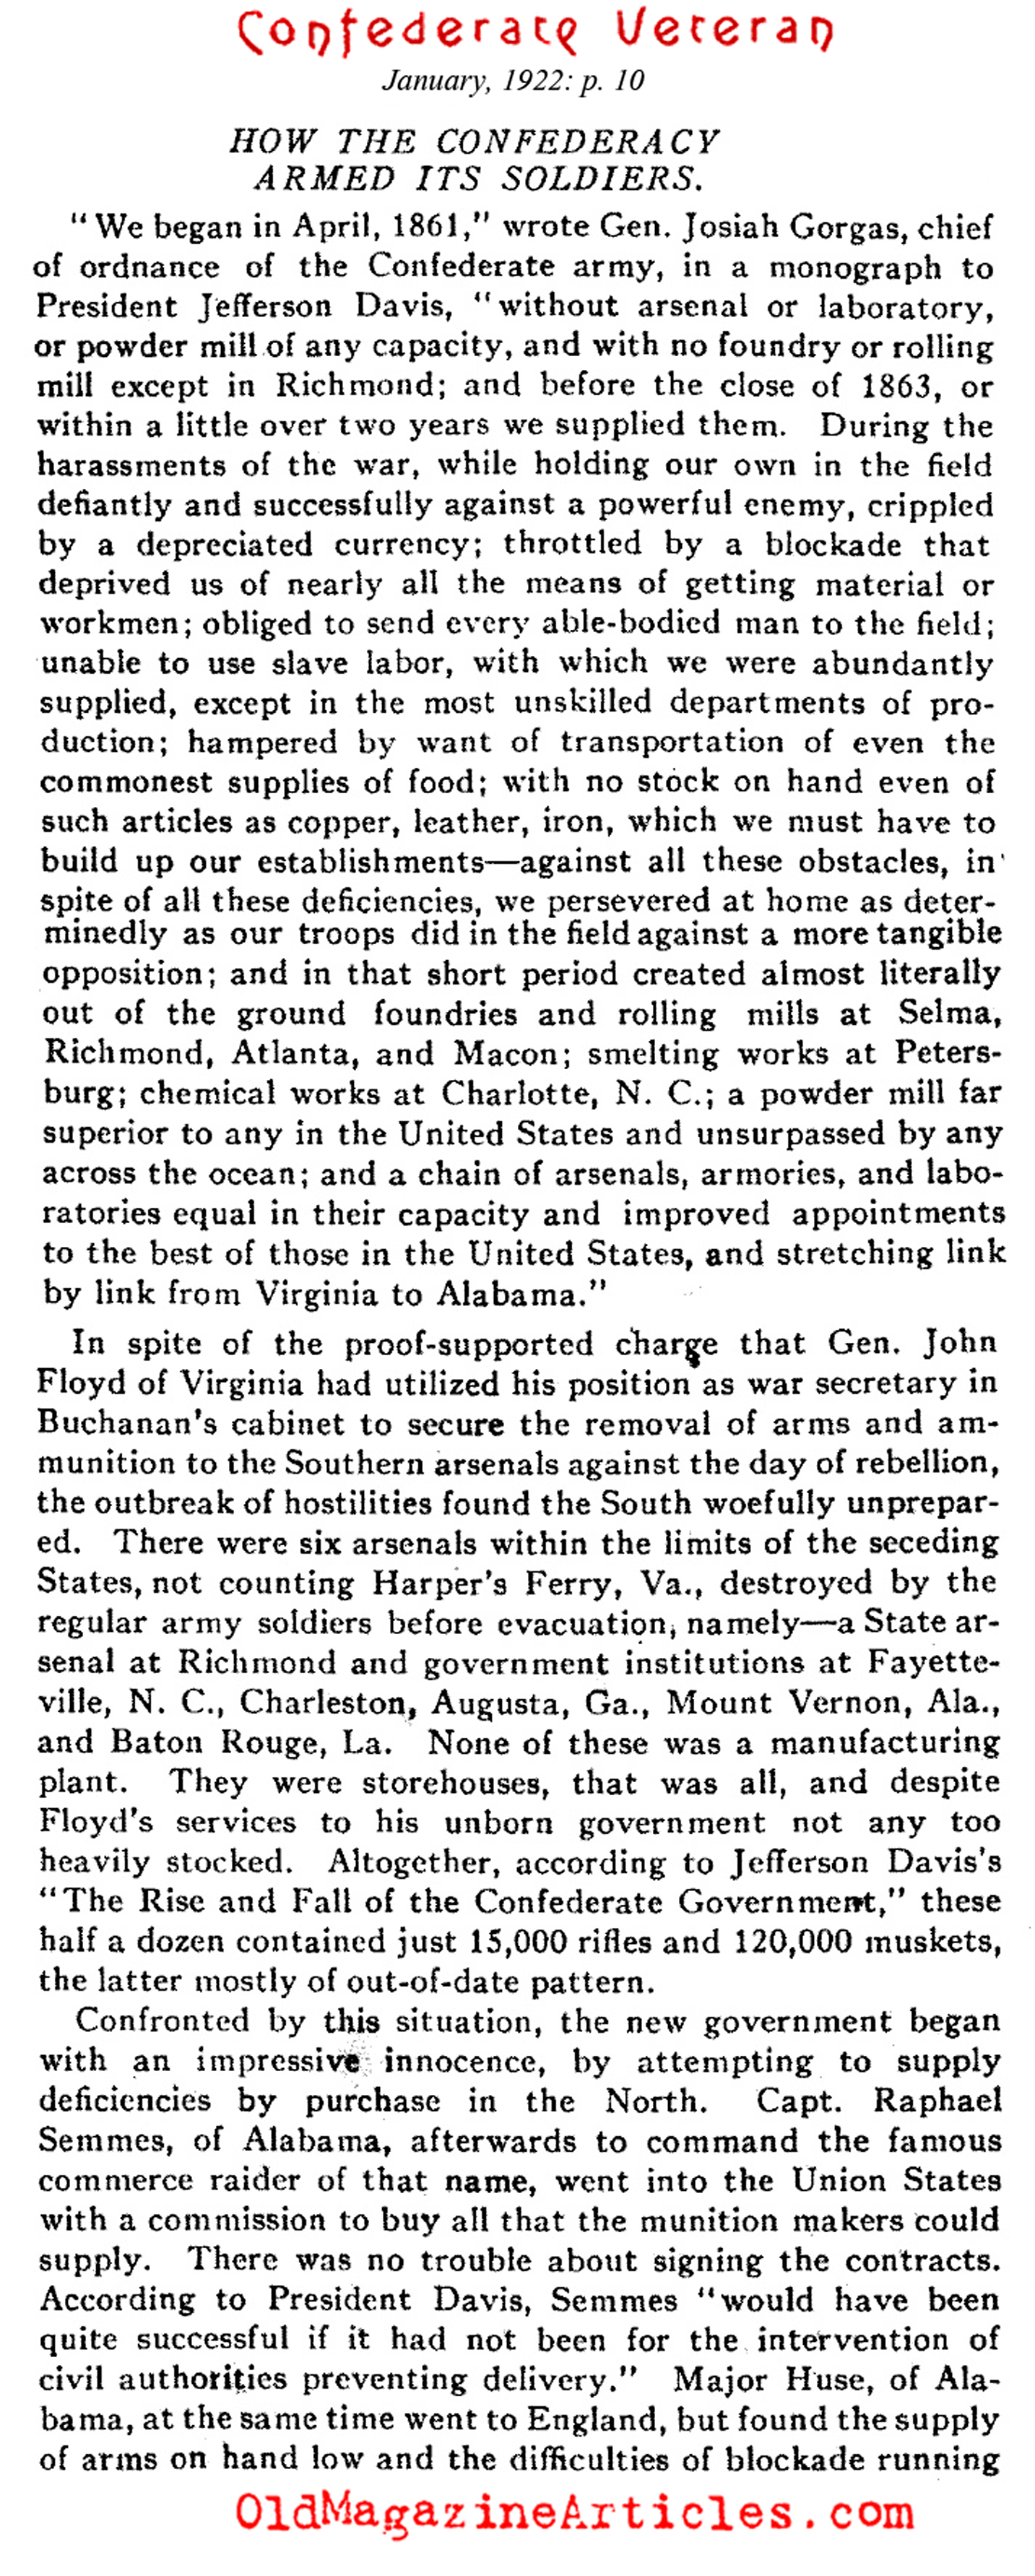 How the Confederacy Armed Themselves (Confederate Veteran Magazine,  1922)